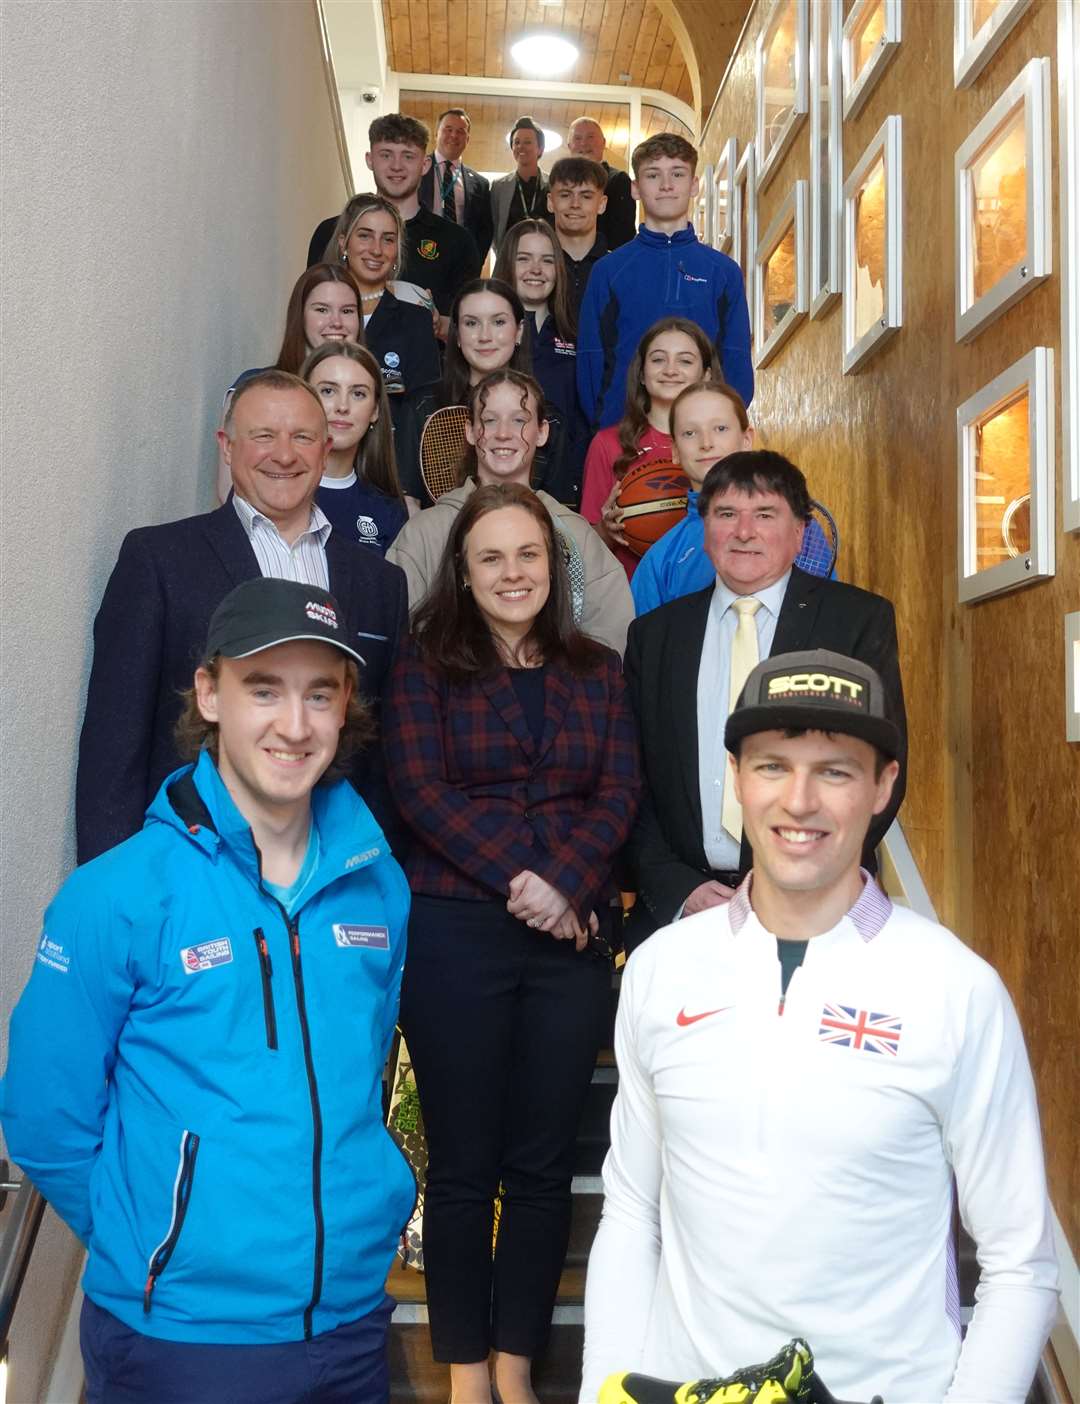 Highland Athlete Travel Award Scheme recipients with Drew Hendry, Kate Forbes, Ken Gowans and other guests.